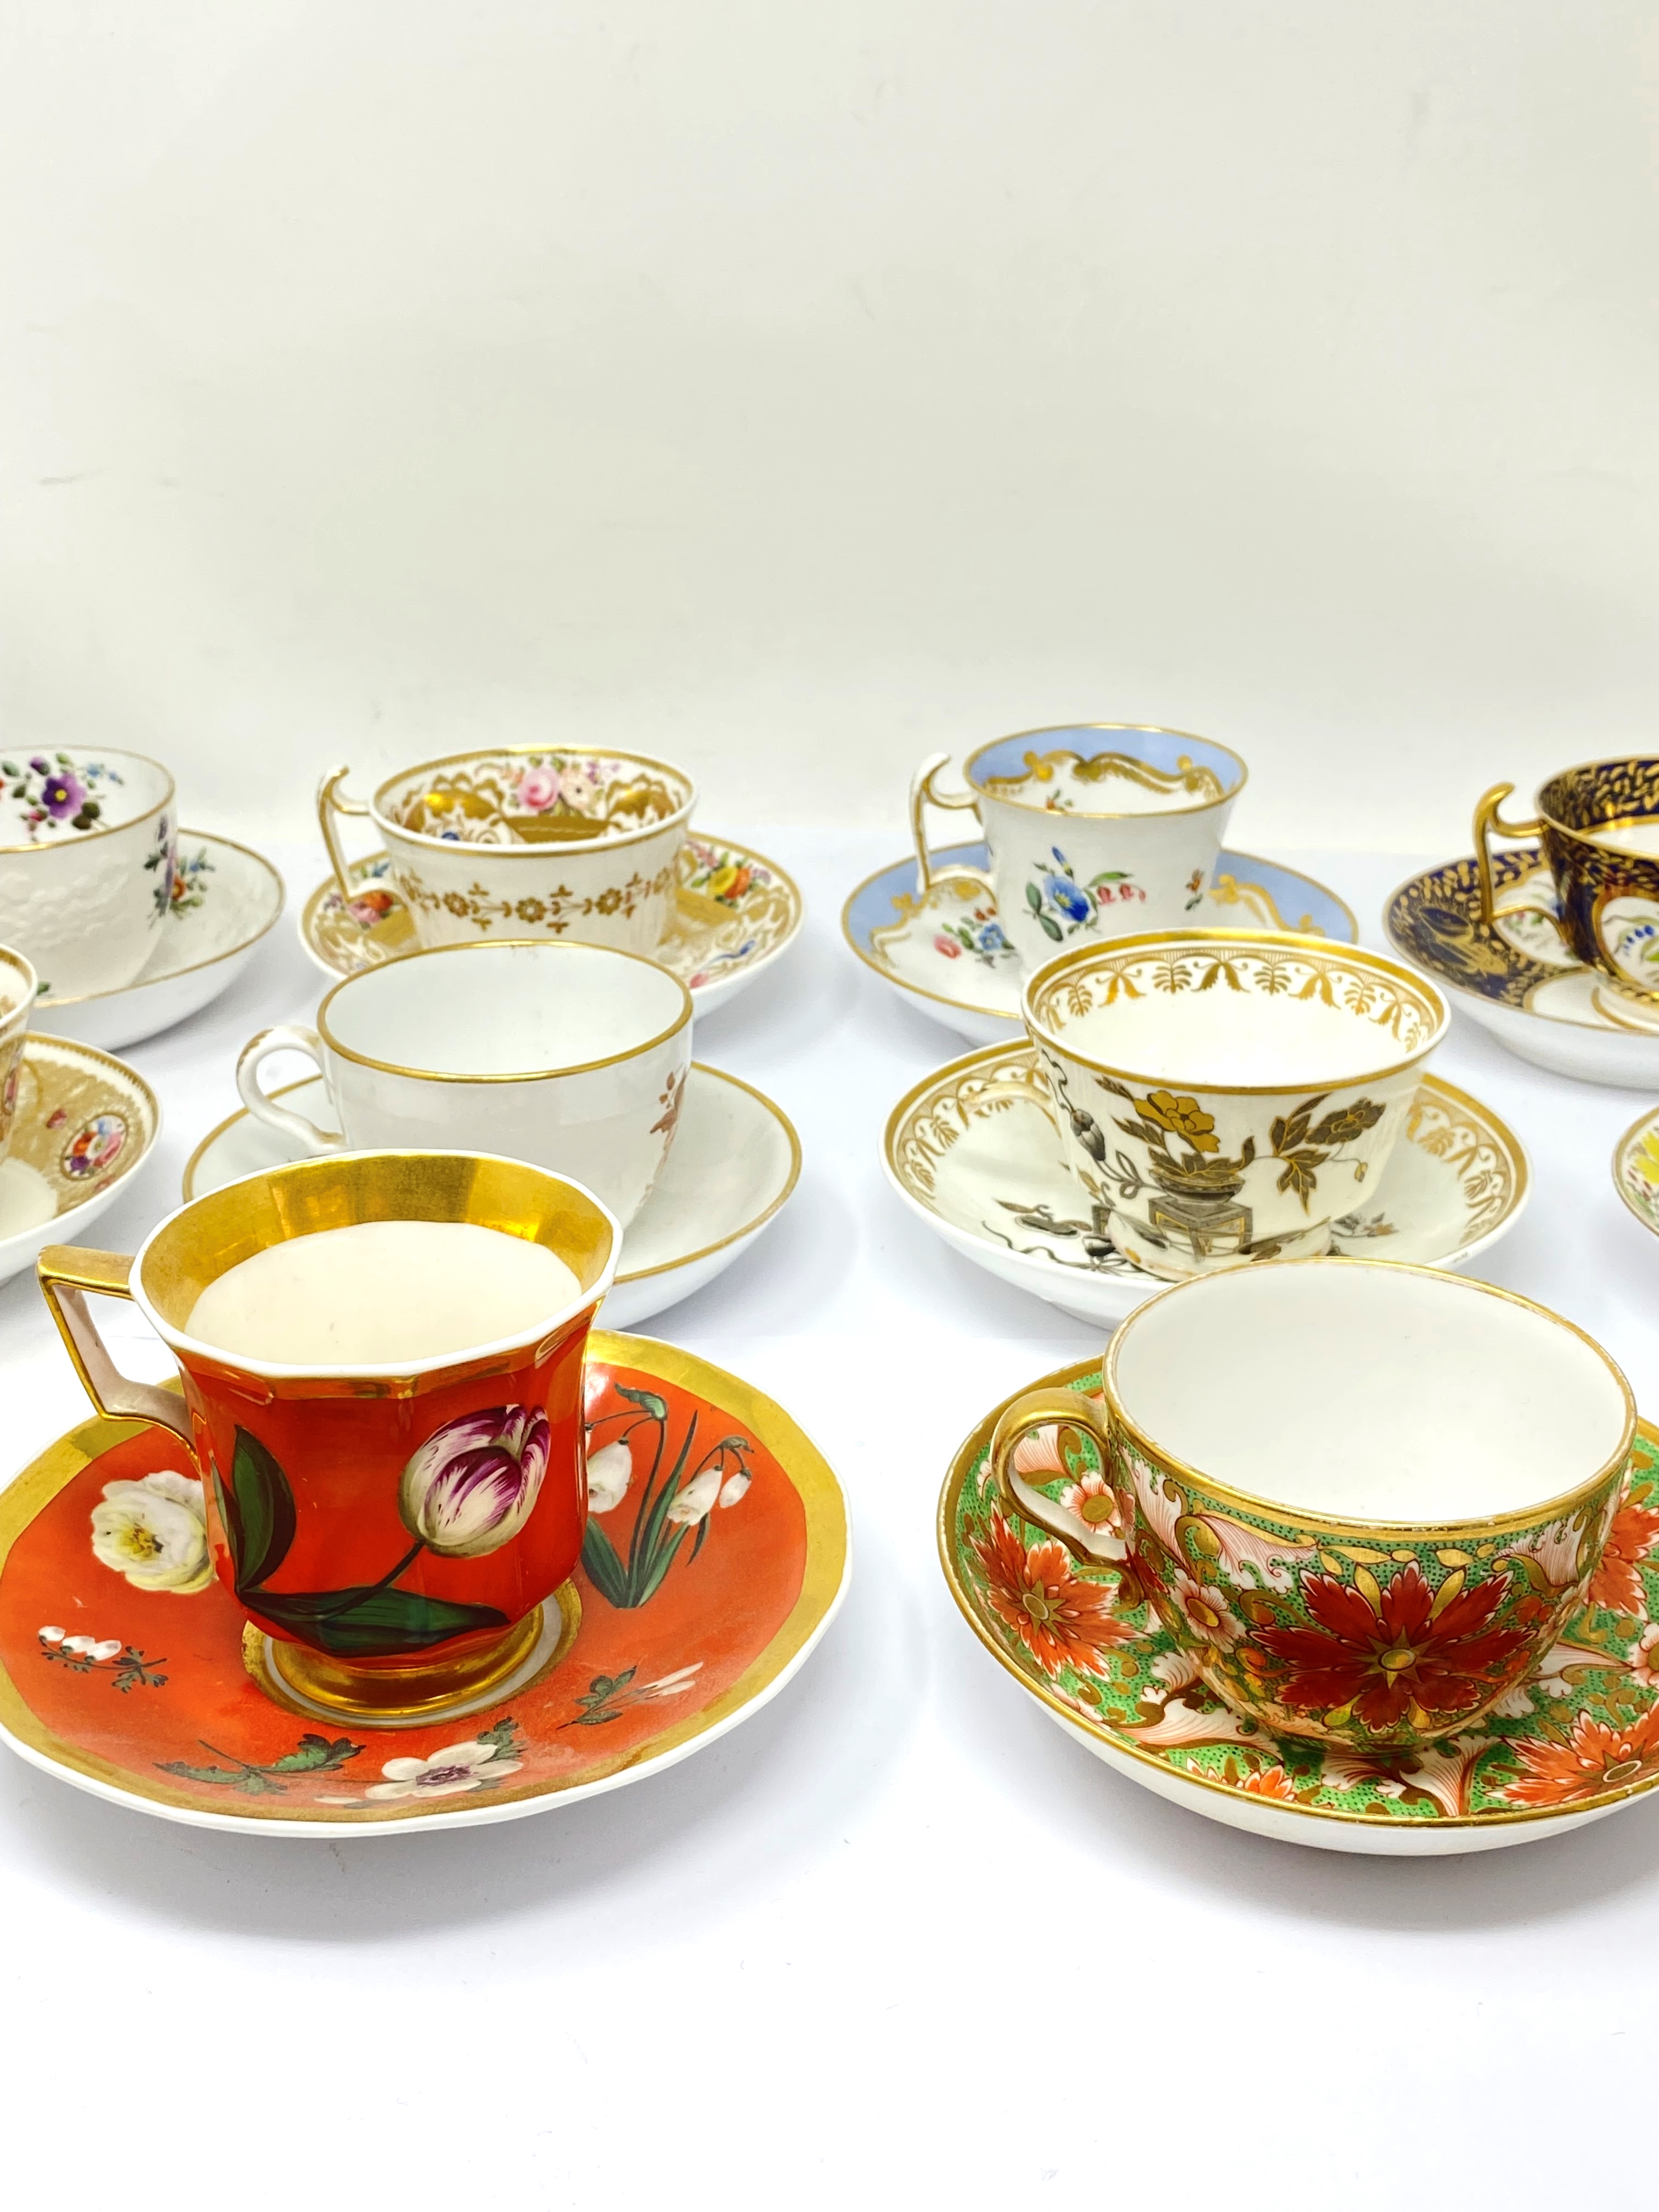 A GROUP OF TWELVE SPODE CUPS AND SAUCERS, EARLY 19TH CENTURY - Image 2 of 2